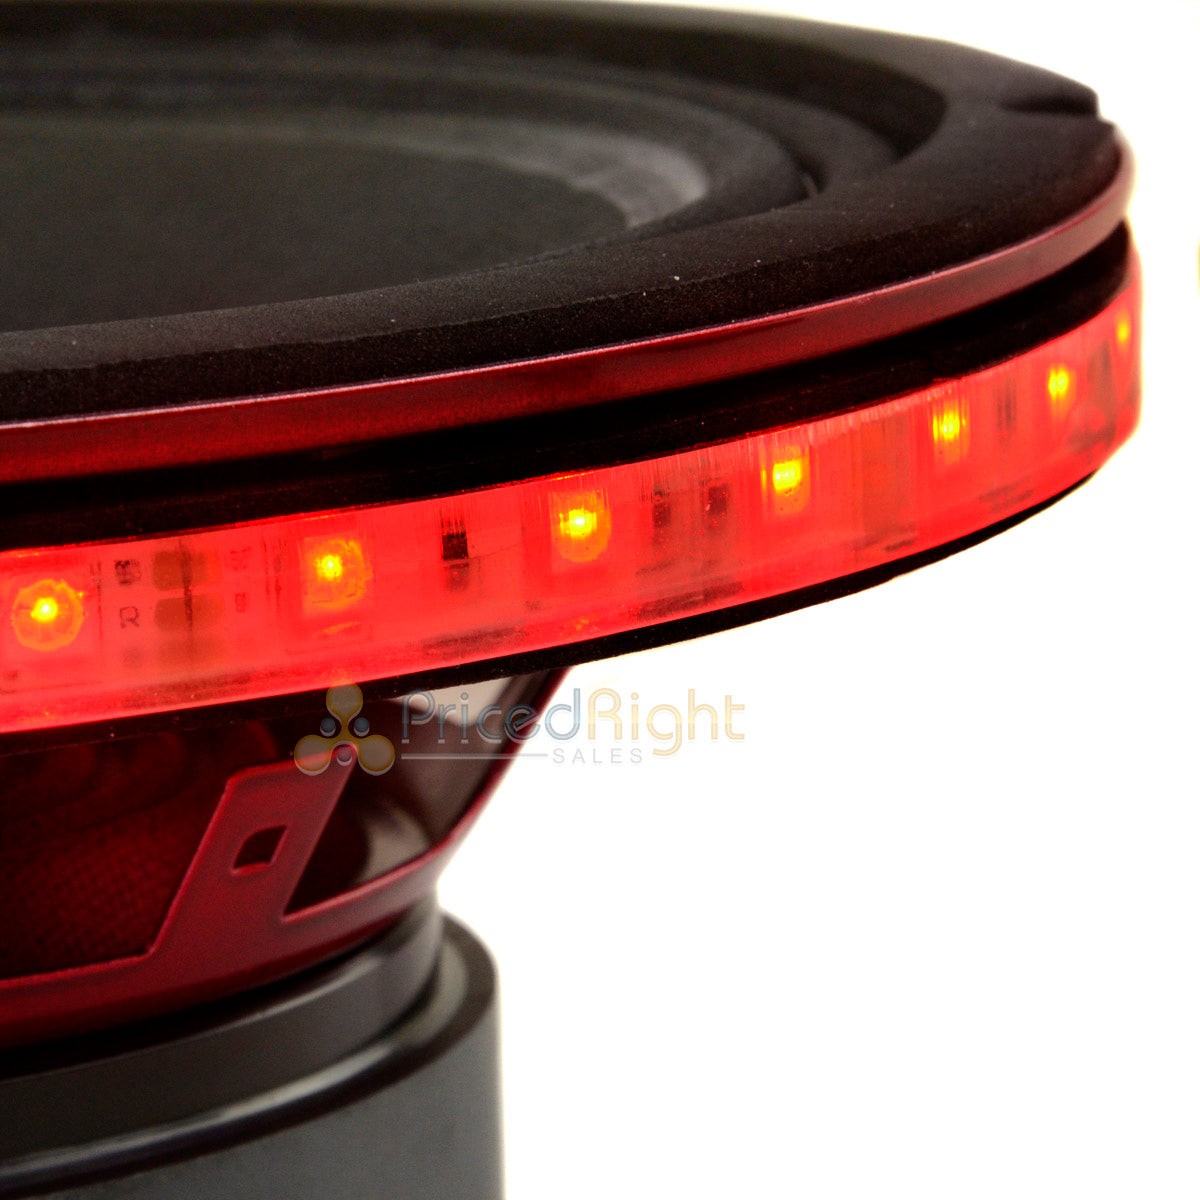 12 " Waterproof RGB LED Speaker Ring 1/2" Spacer DS18 LRING12 Accent Single